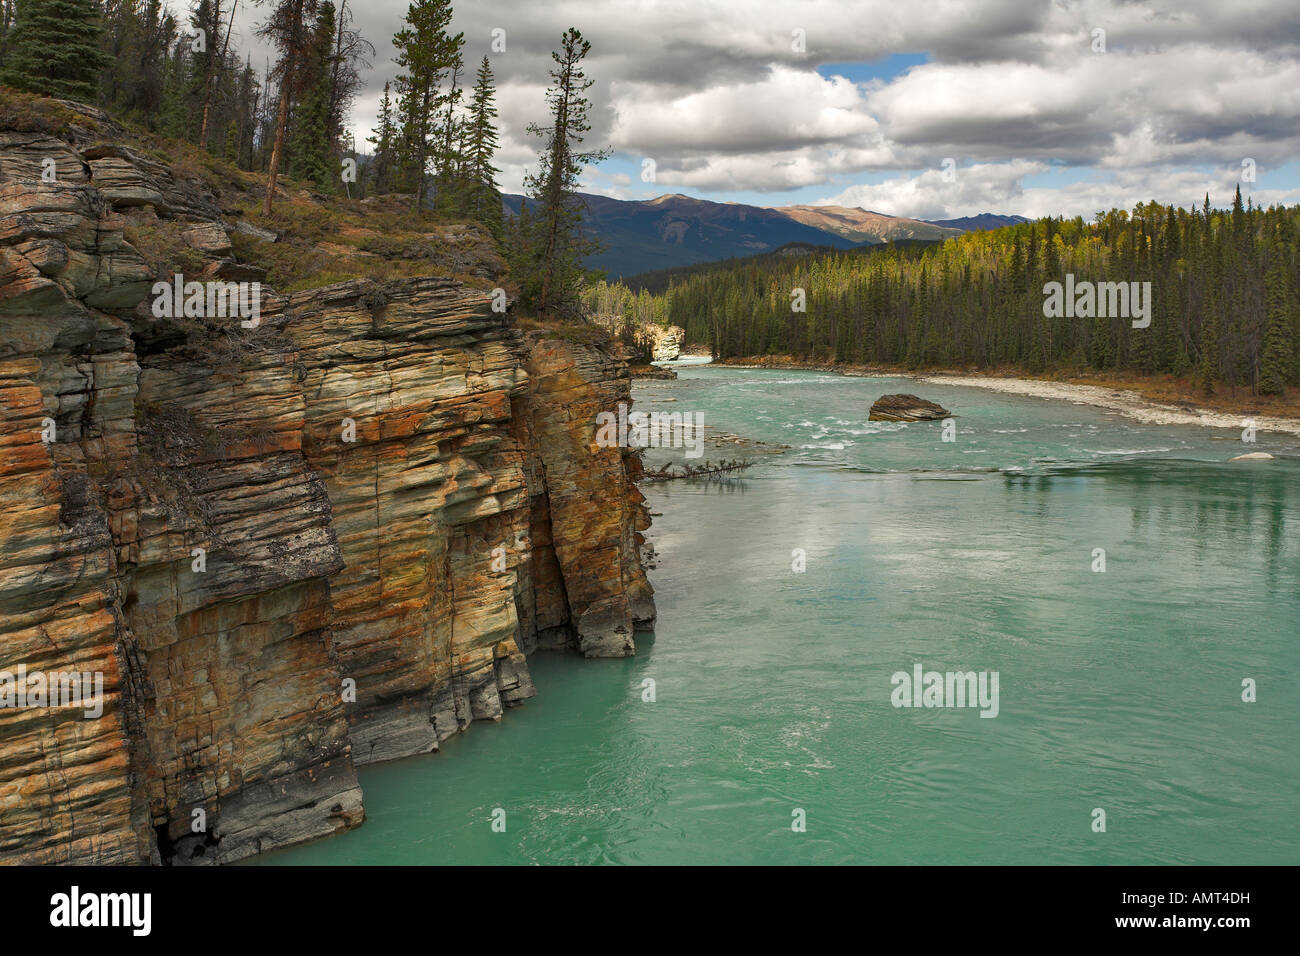 Flood of the river Athabasca after a powerful falls Stock Photo